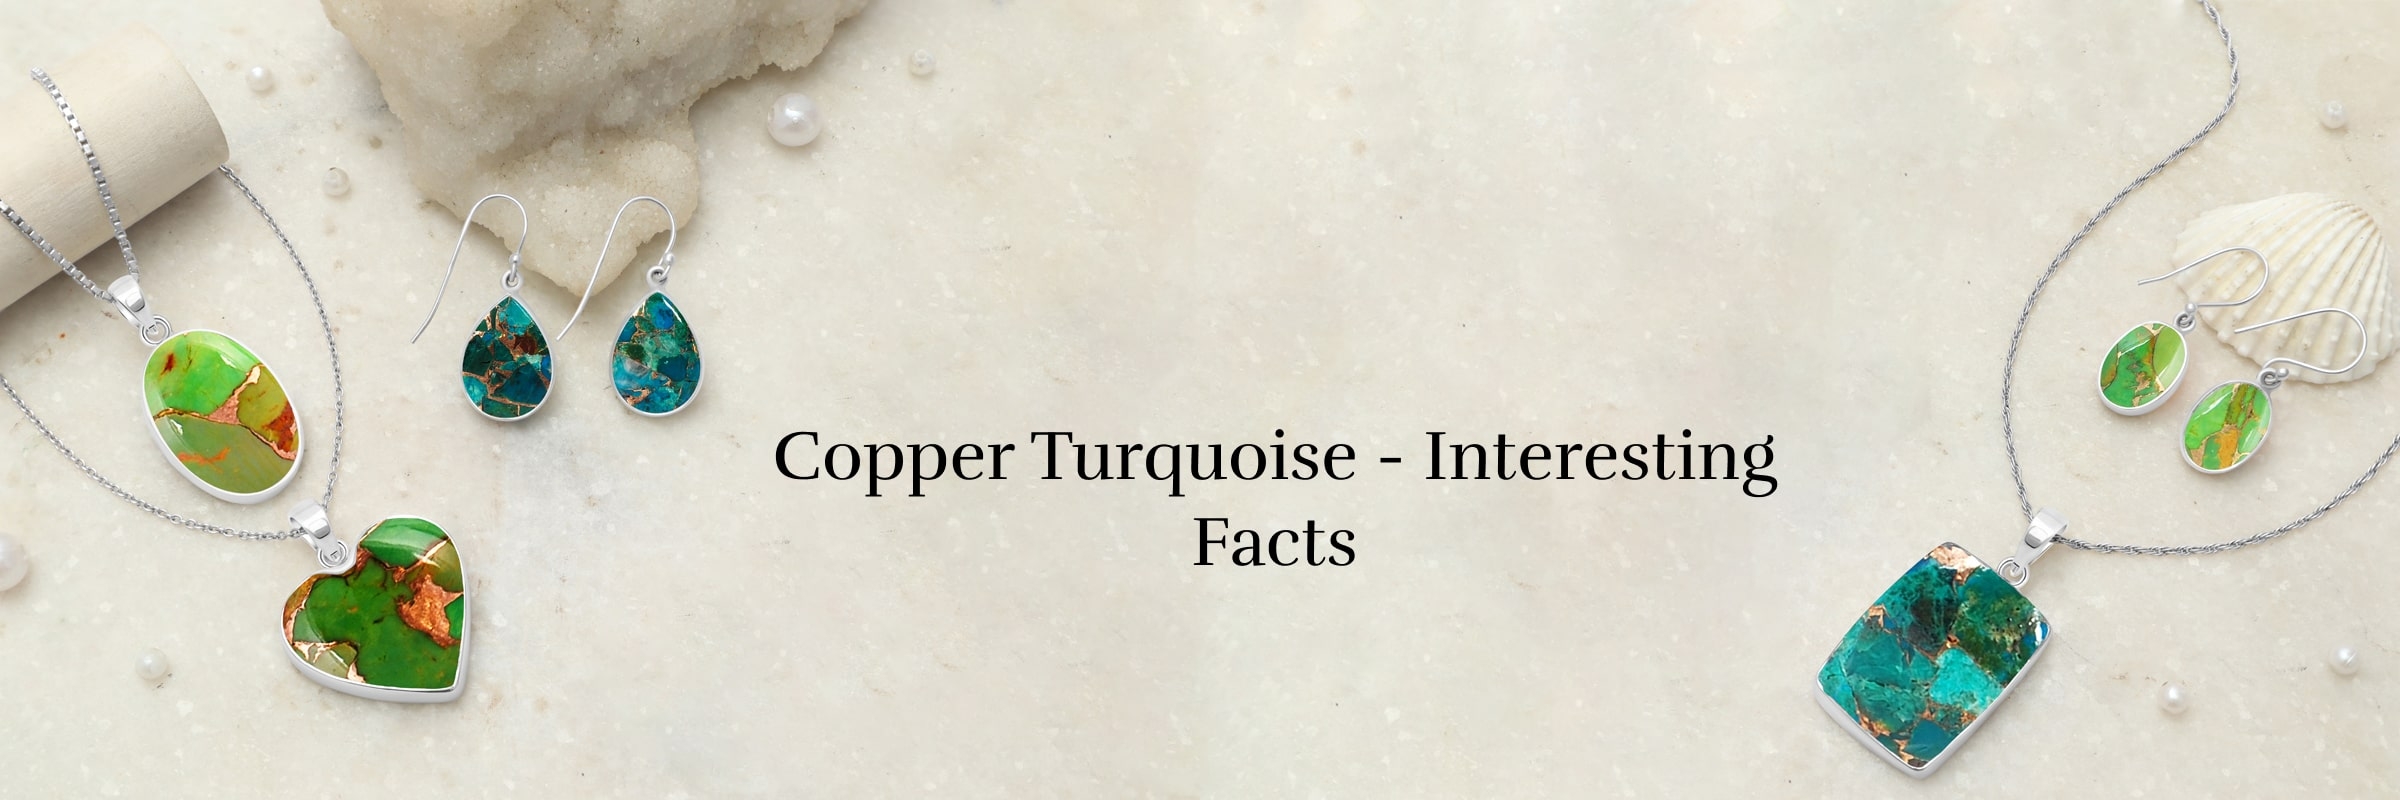 Facts About Copper Turquoise